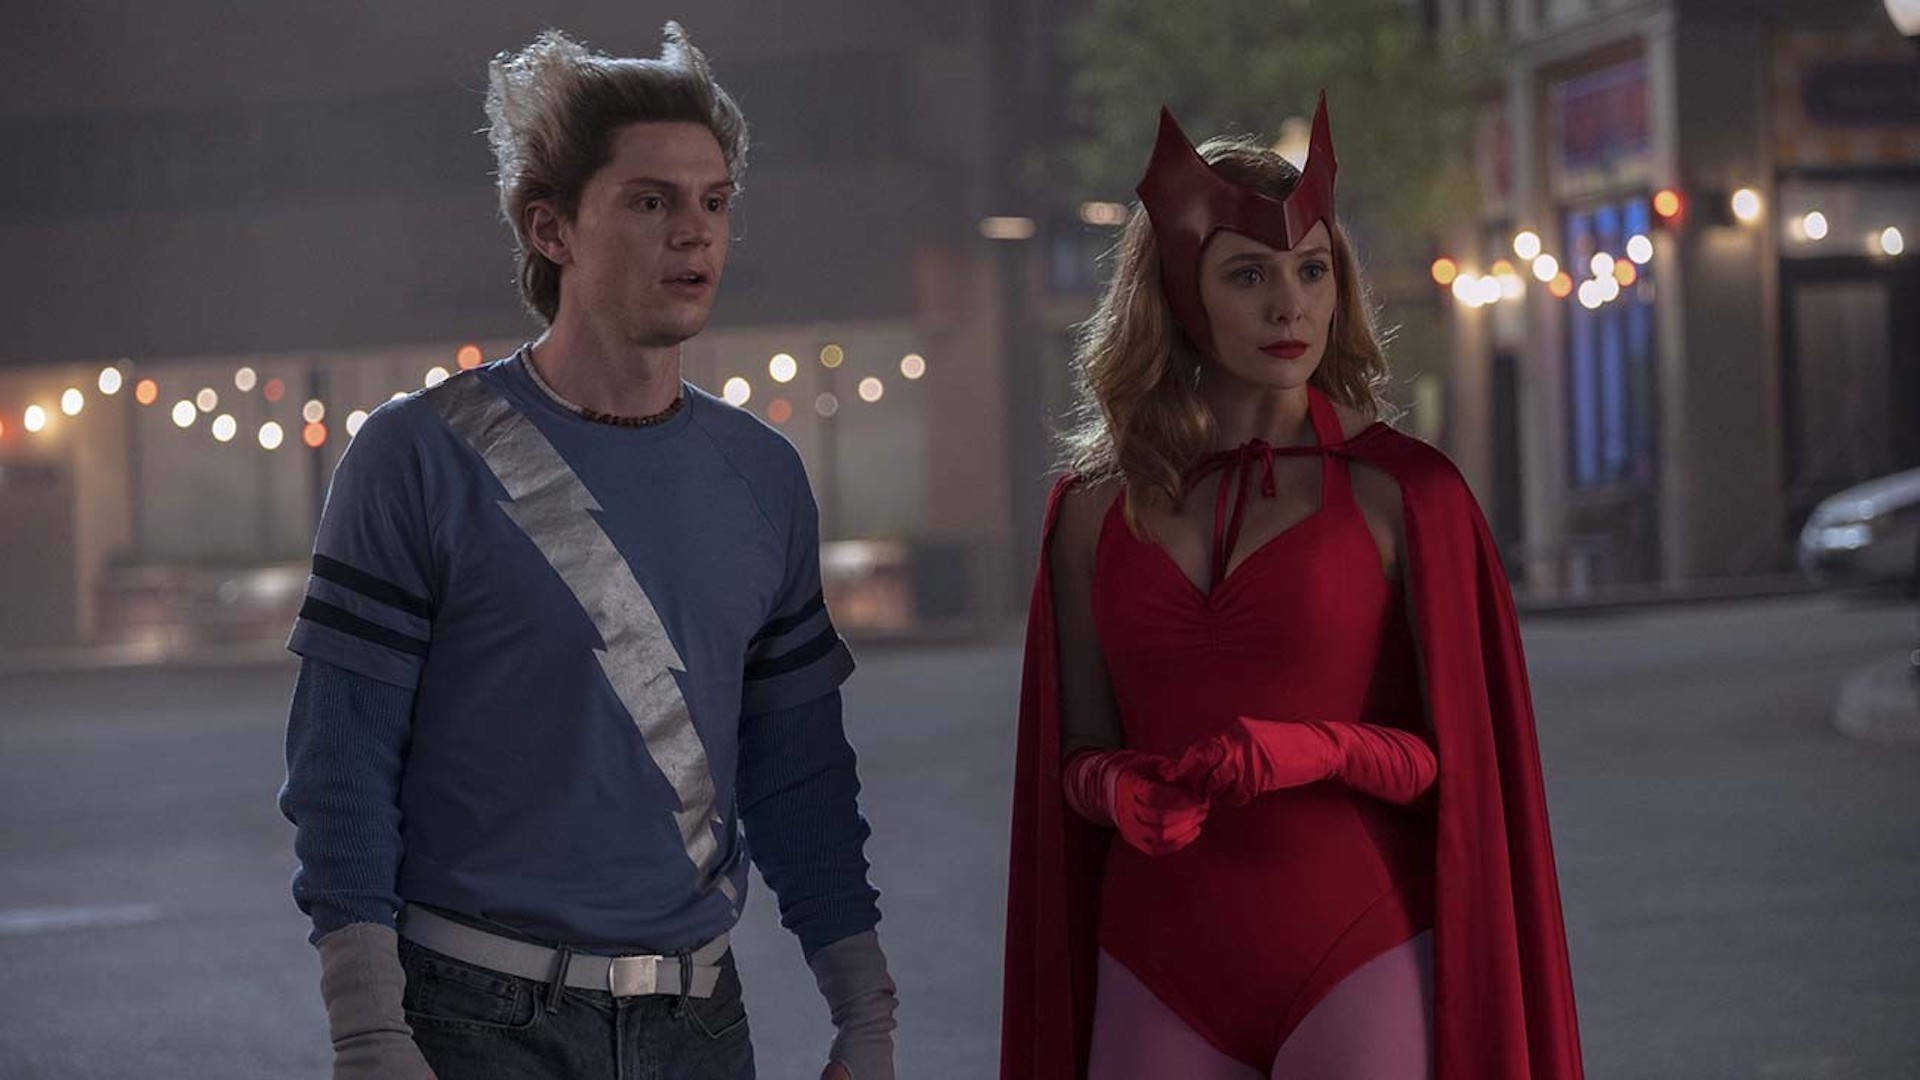 Scarlet Witch And Quicksilver In Wandavision Background